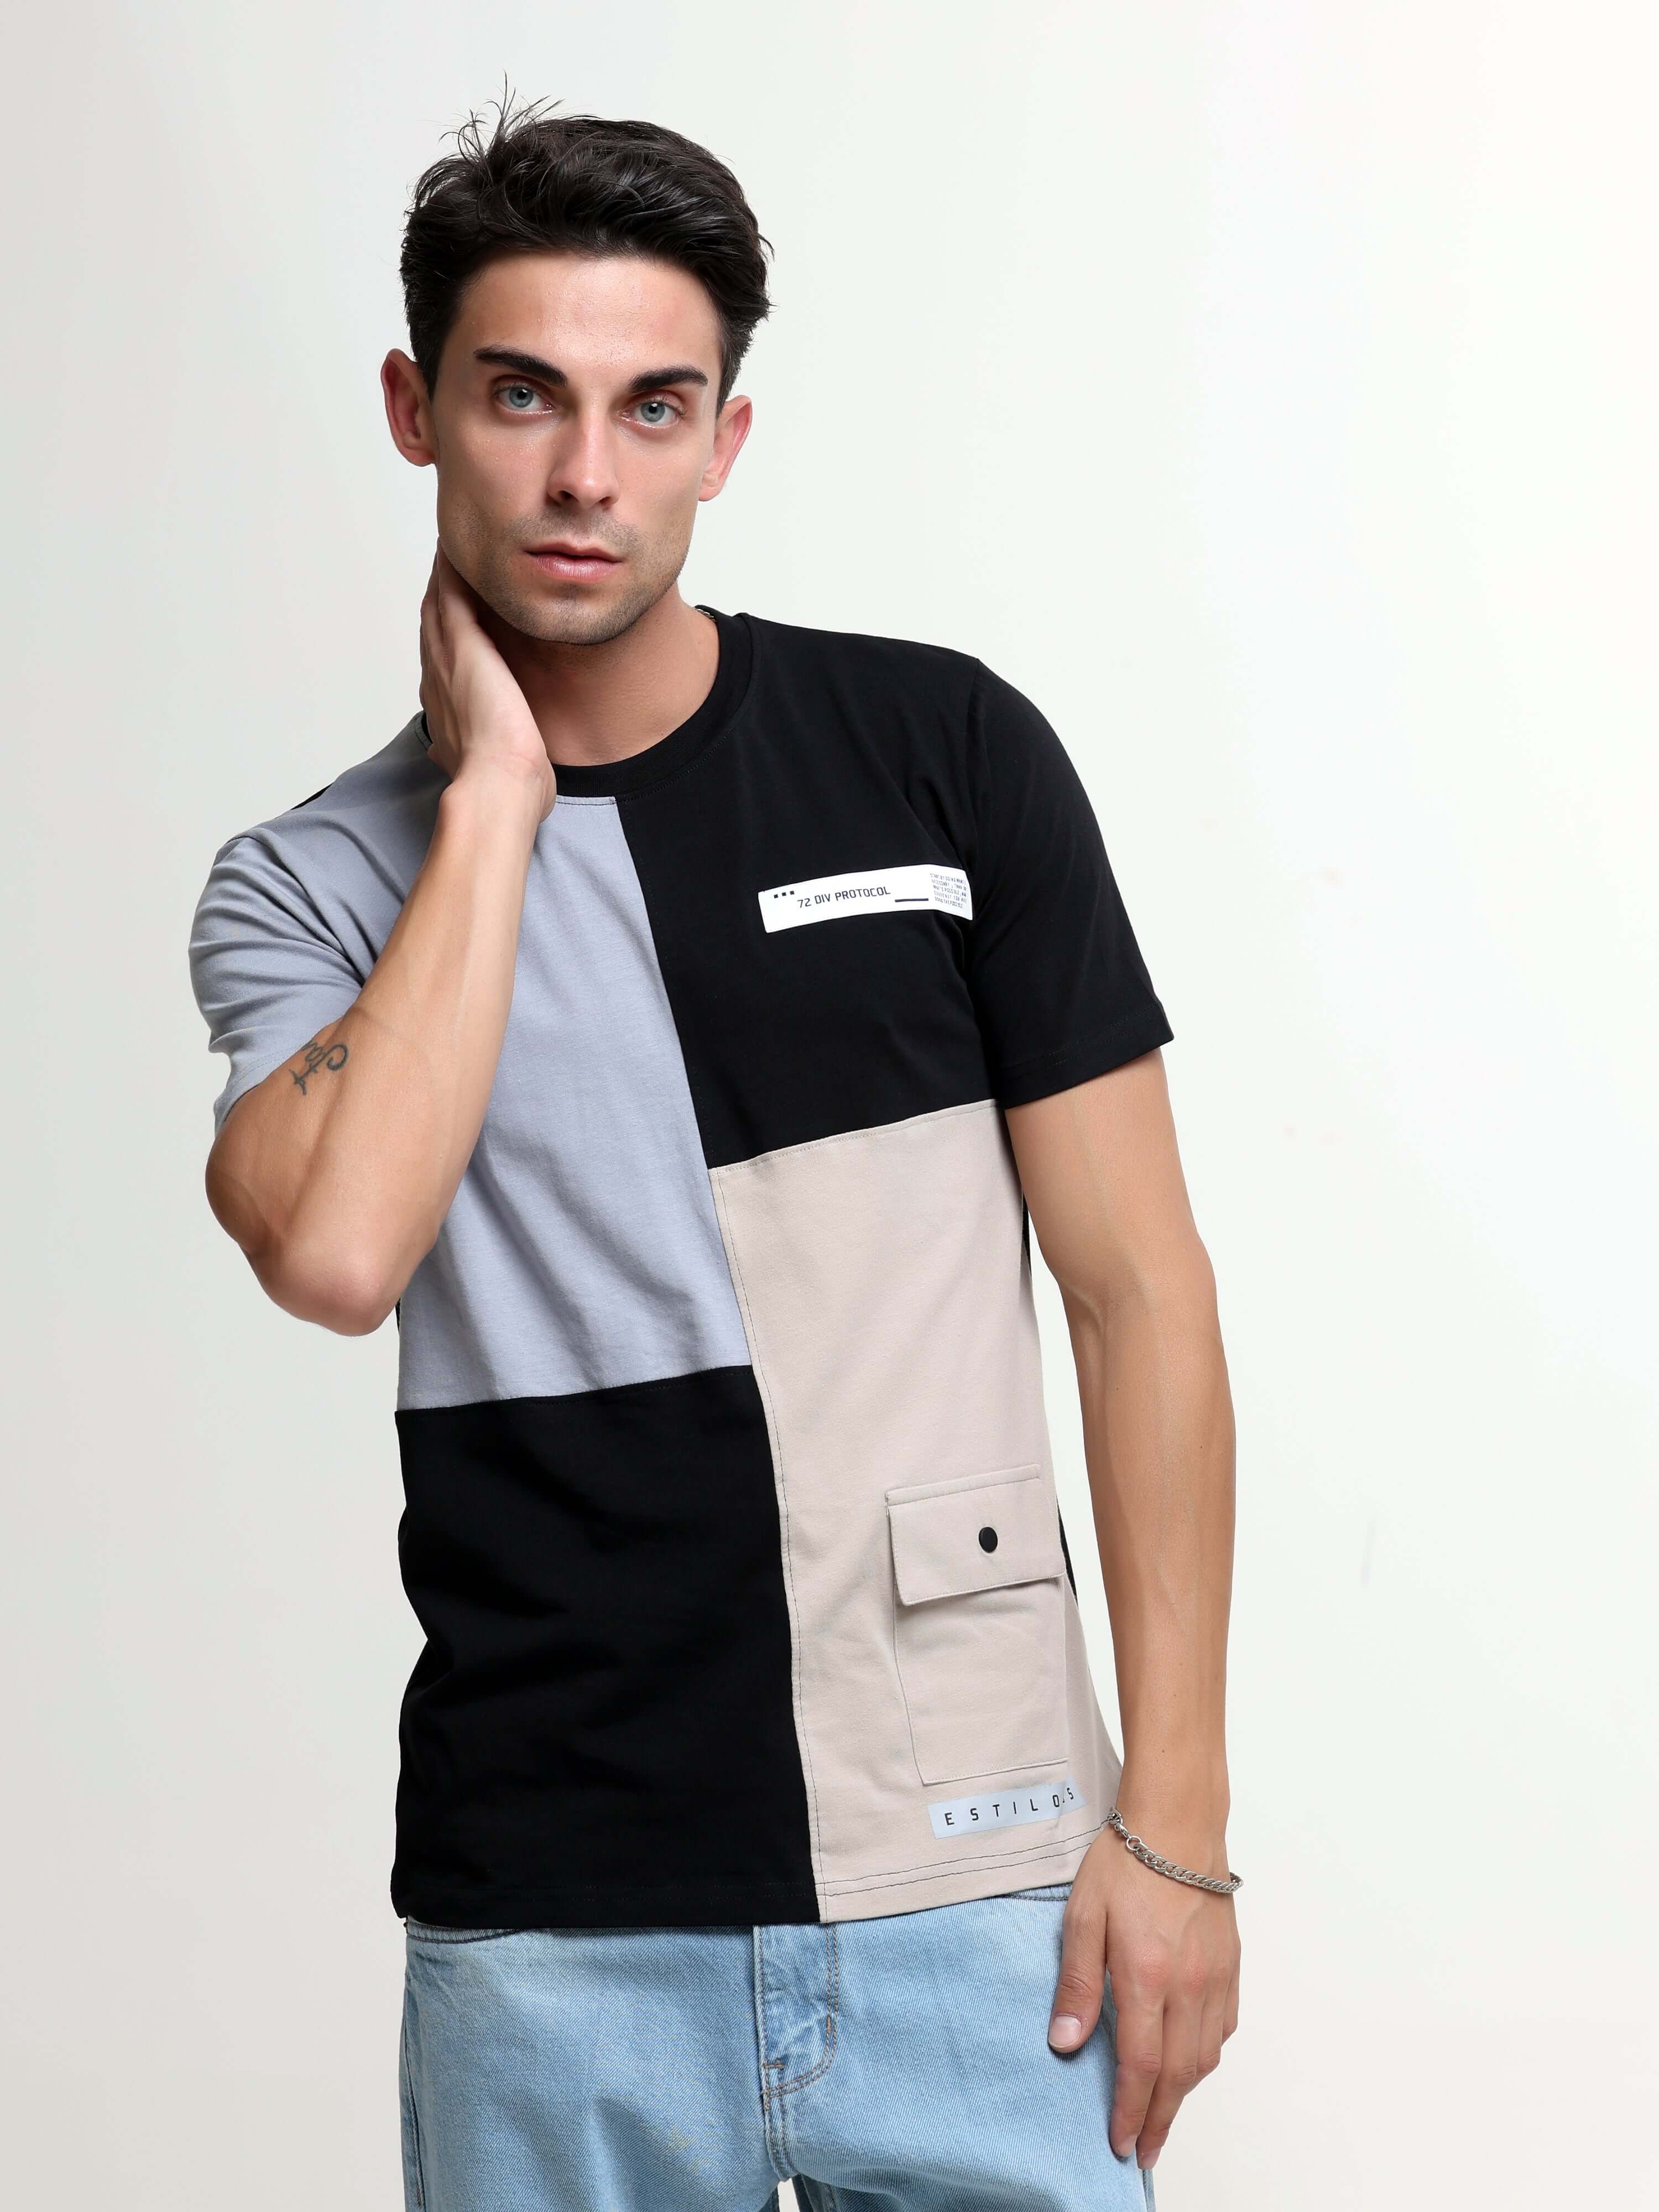 Turbo sand beige light weight tshirt shop online at Estilocus. This relax-fit Cut and Sew T-shirt is comfortable and the perfect essential all year round. Pair it with white jeans and sneakers and layer it up with a denim jacket for a casual and put-toget